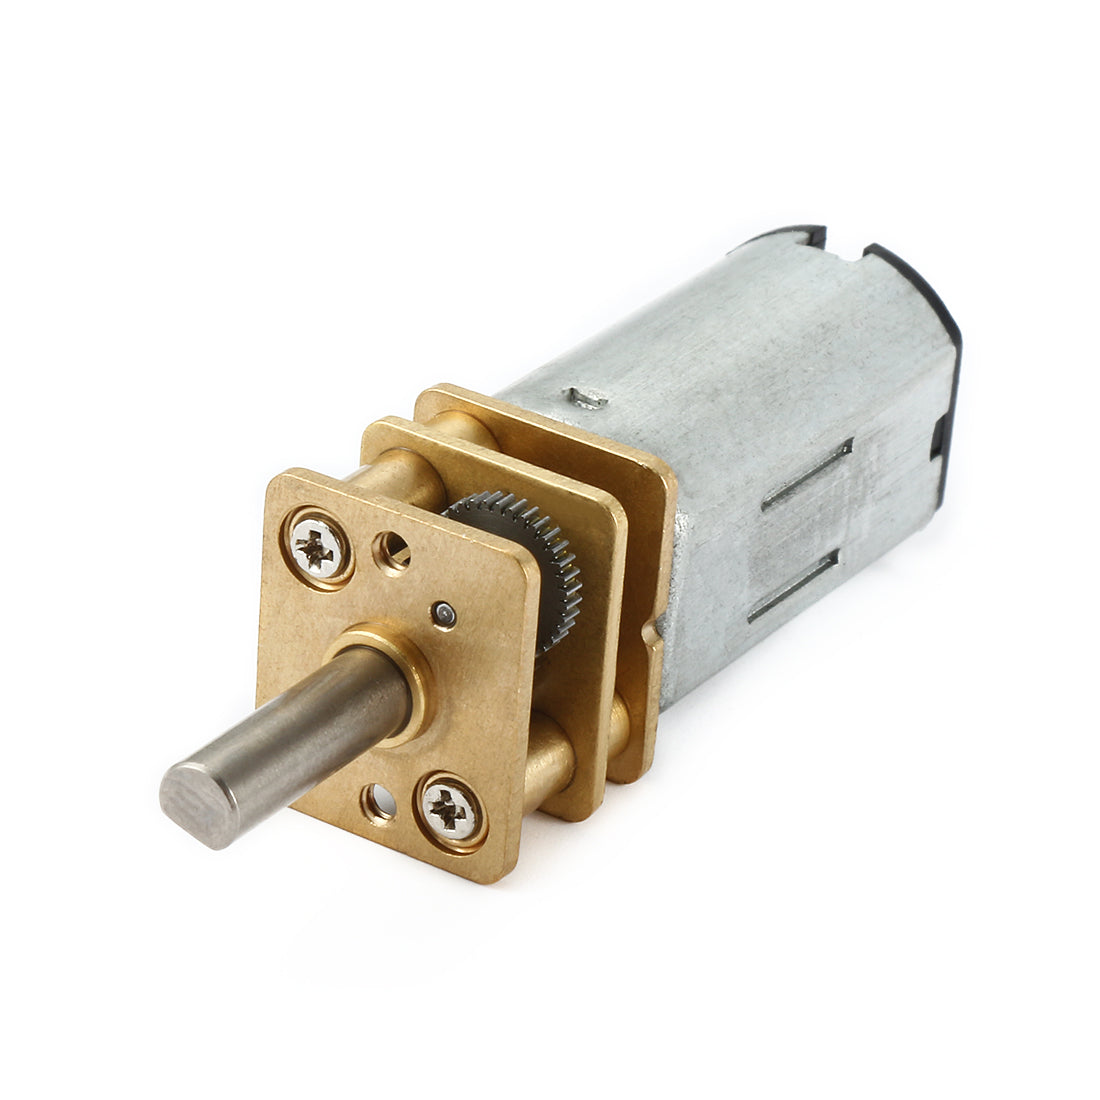 Uxcell Uxcell DC12V 94RPM Mini Speed Reduction Motor Electric Micro Gear Box with 2 Terminals